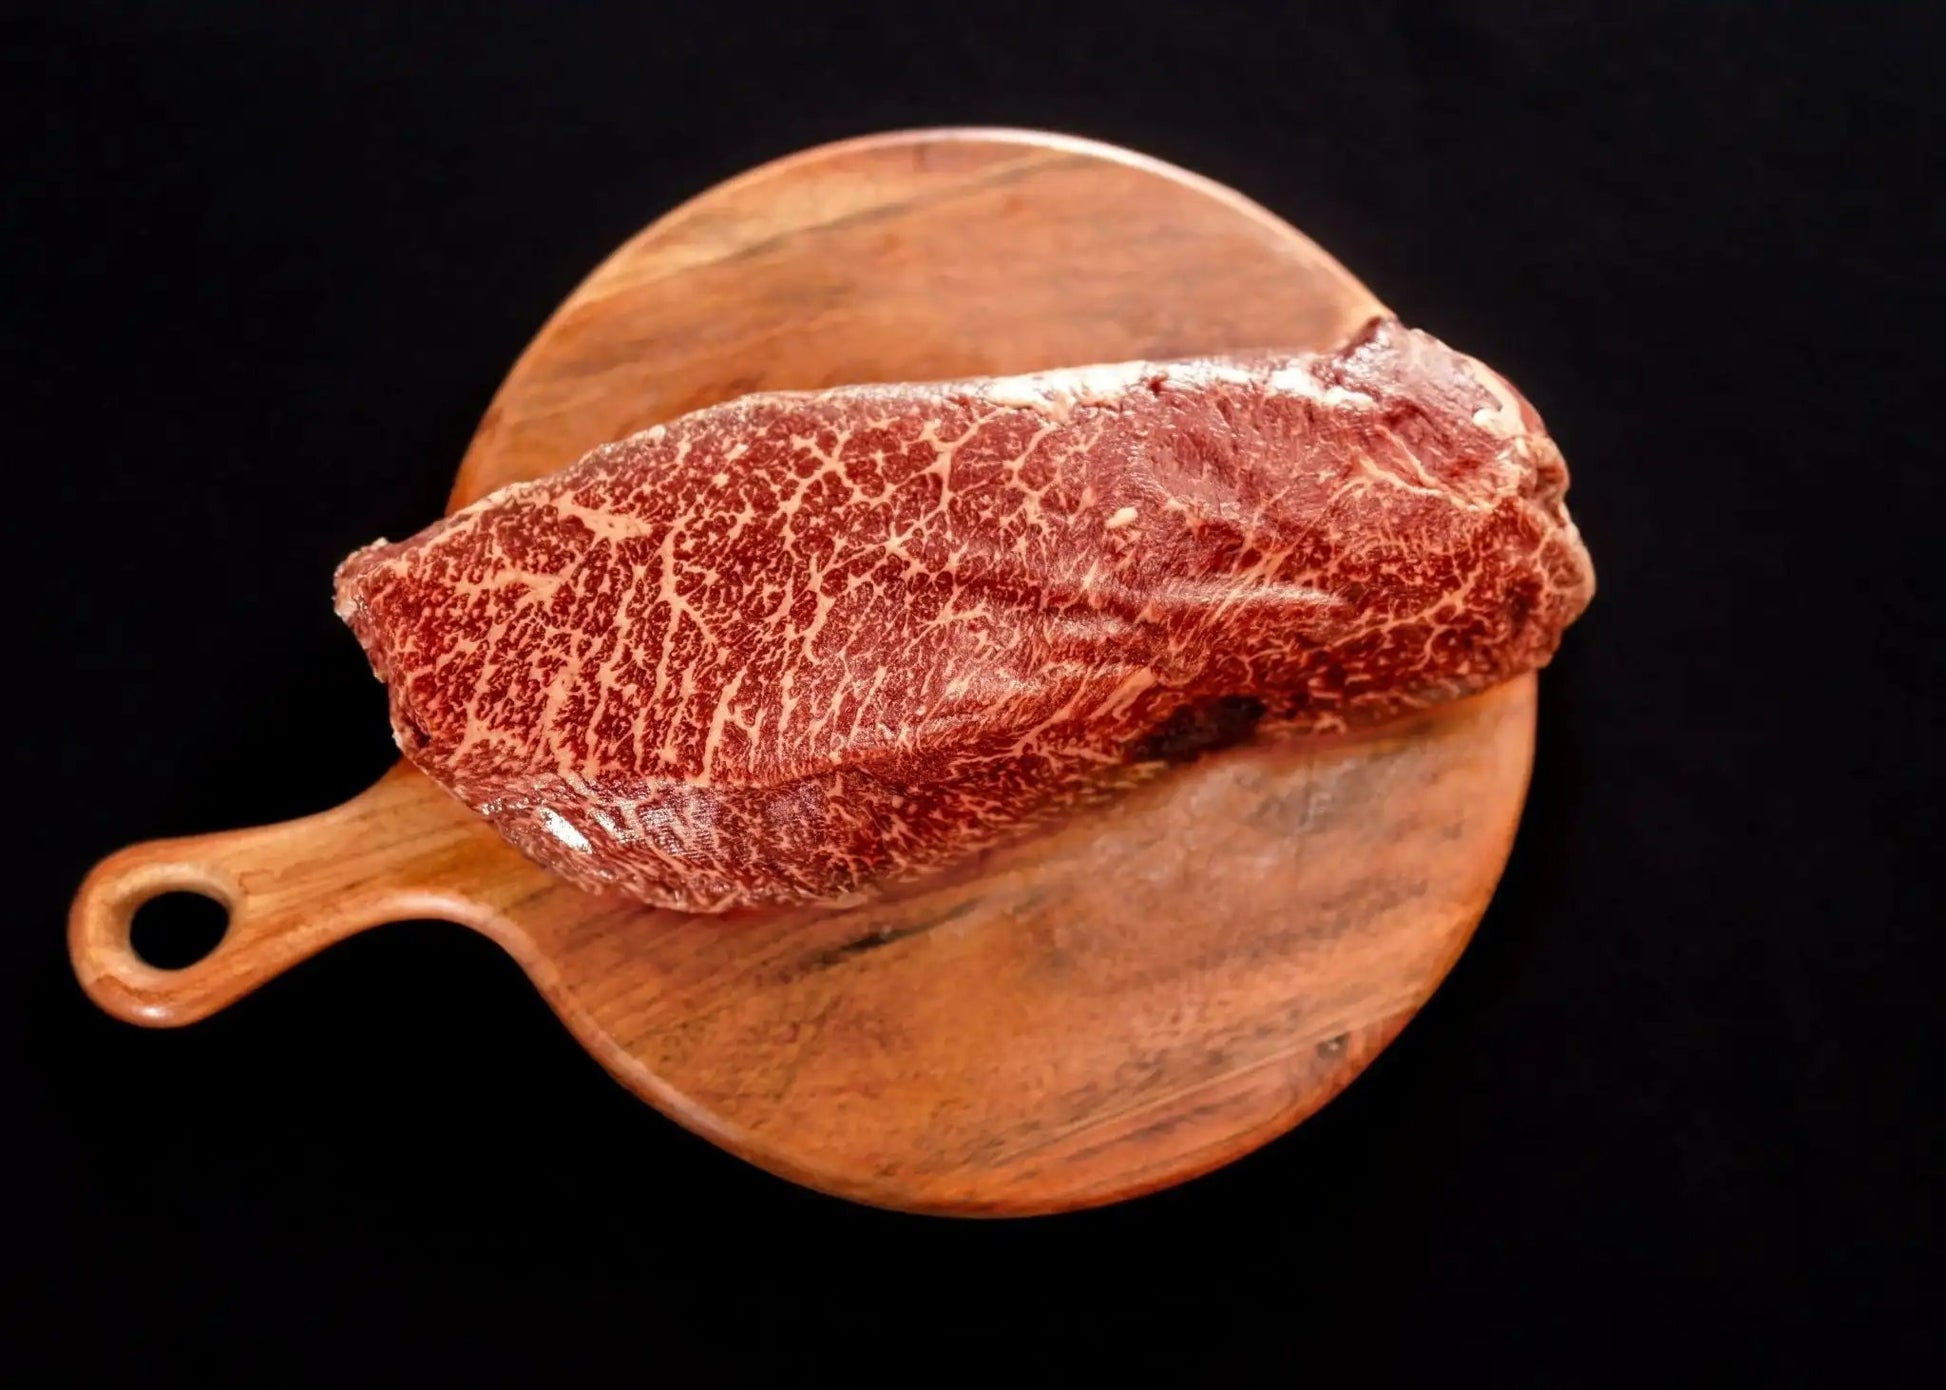 100% All-Natural Grass-Fed Pasture-Raised Wagyu London Broil - The Hufeisen-Ranch (WYO Wagyu)